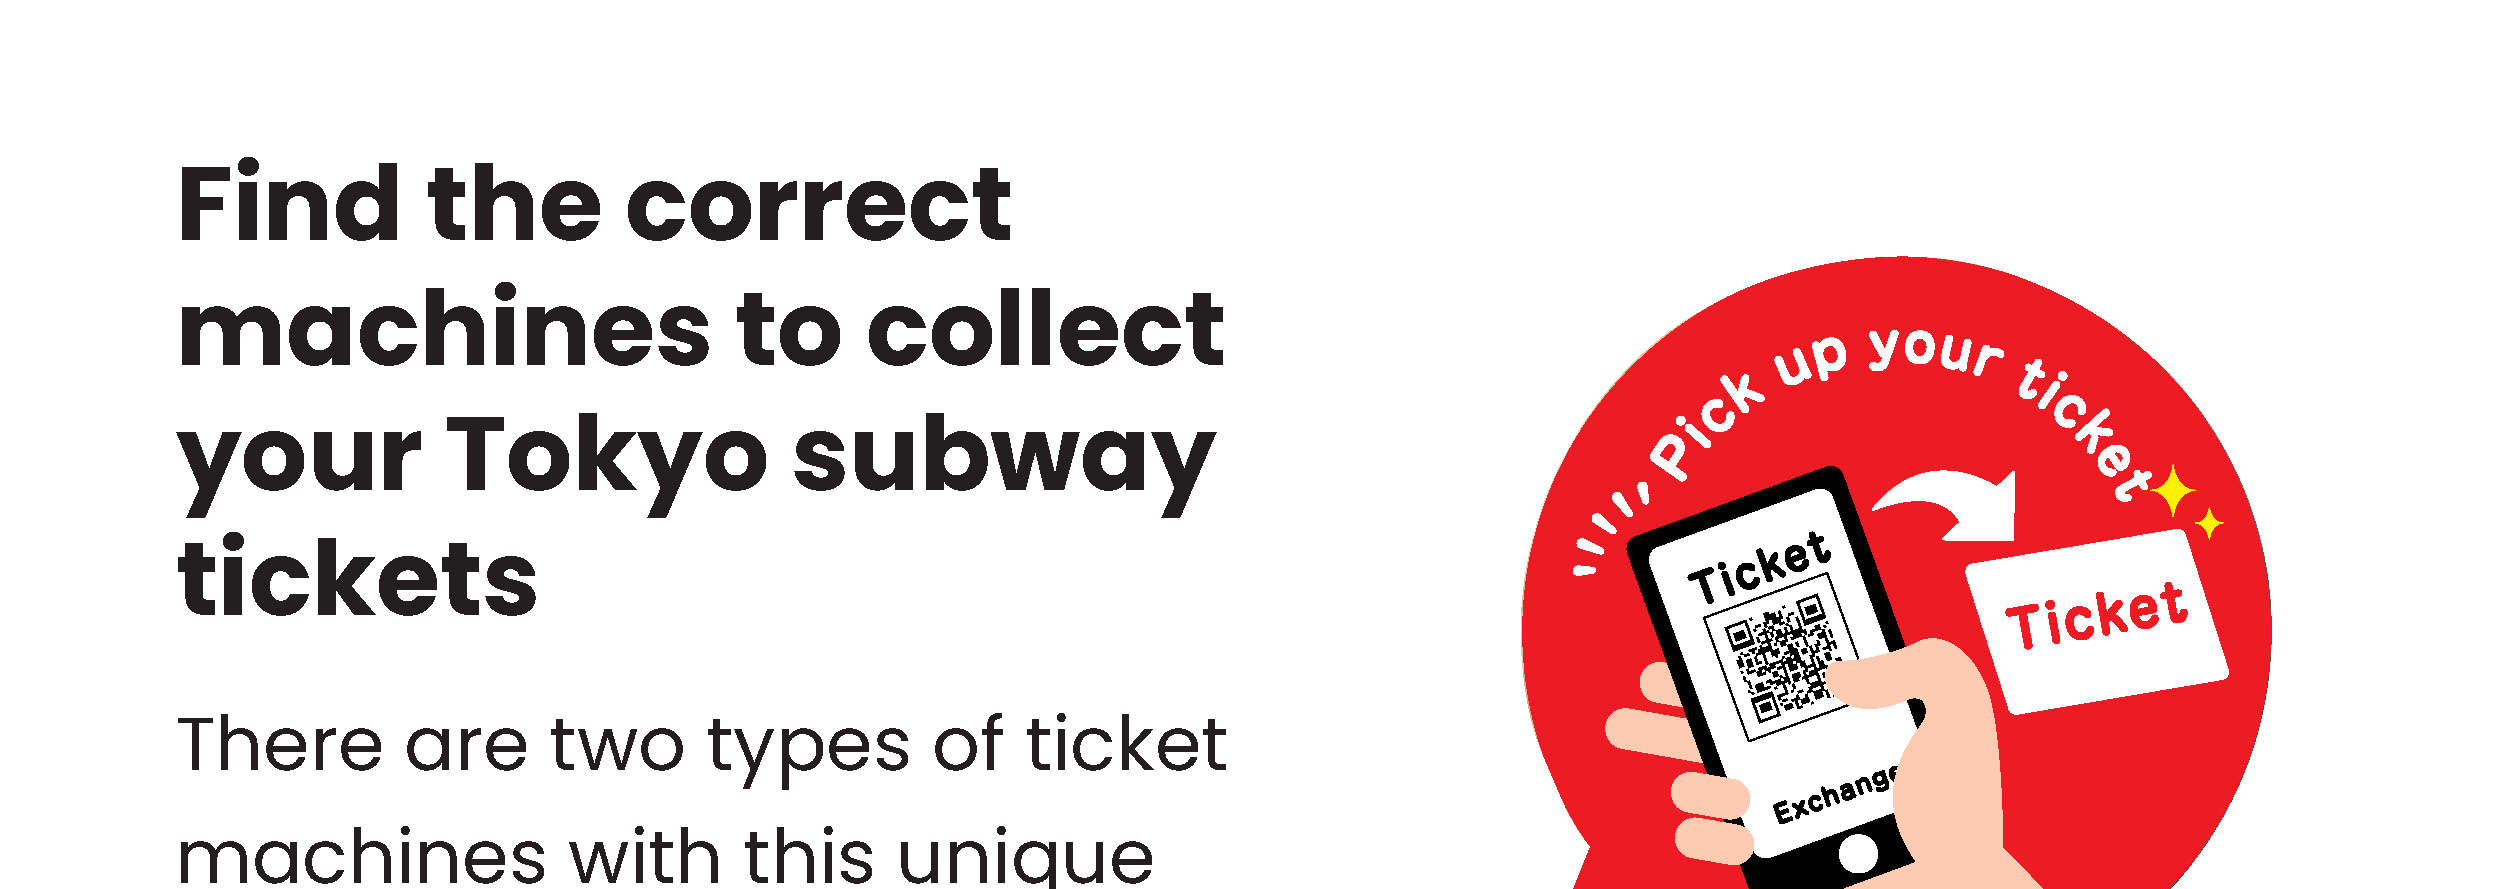 Correct ticket machines for collecting Tokyo Subway Ticket